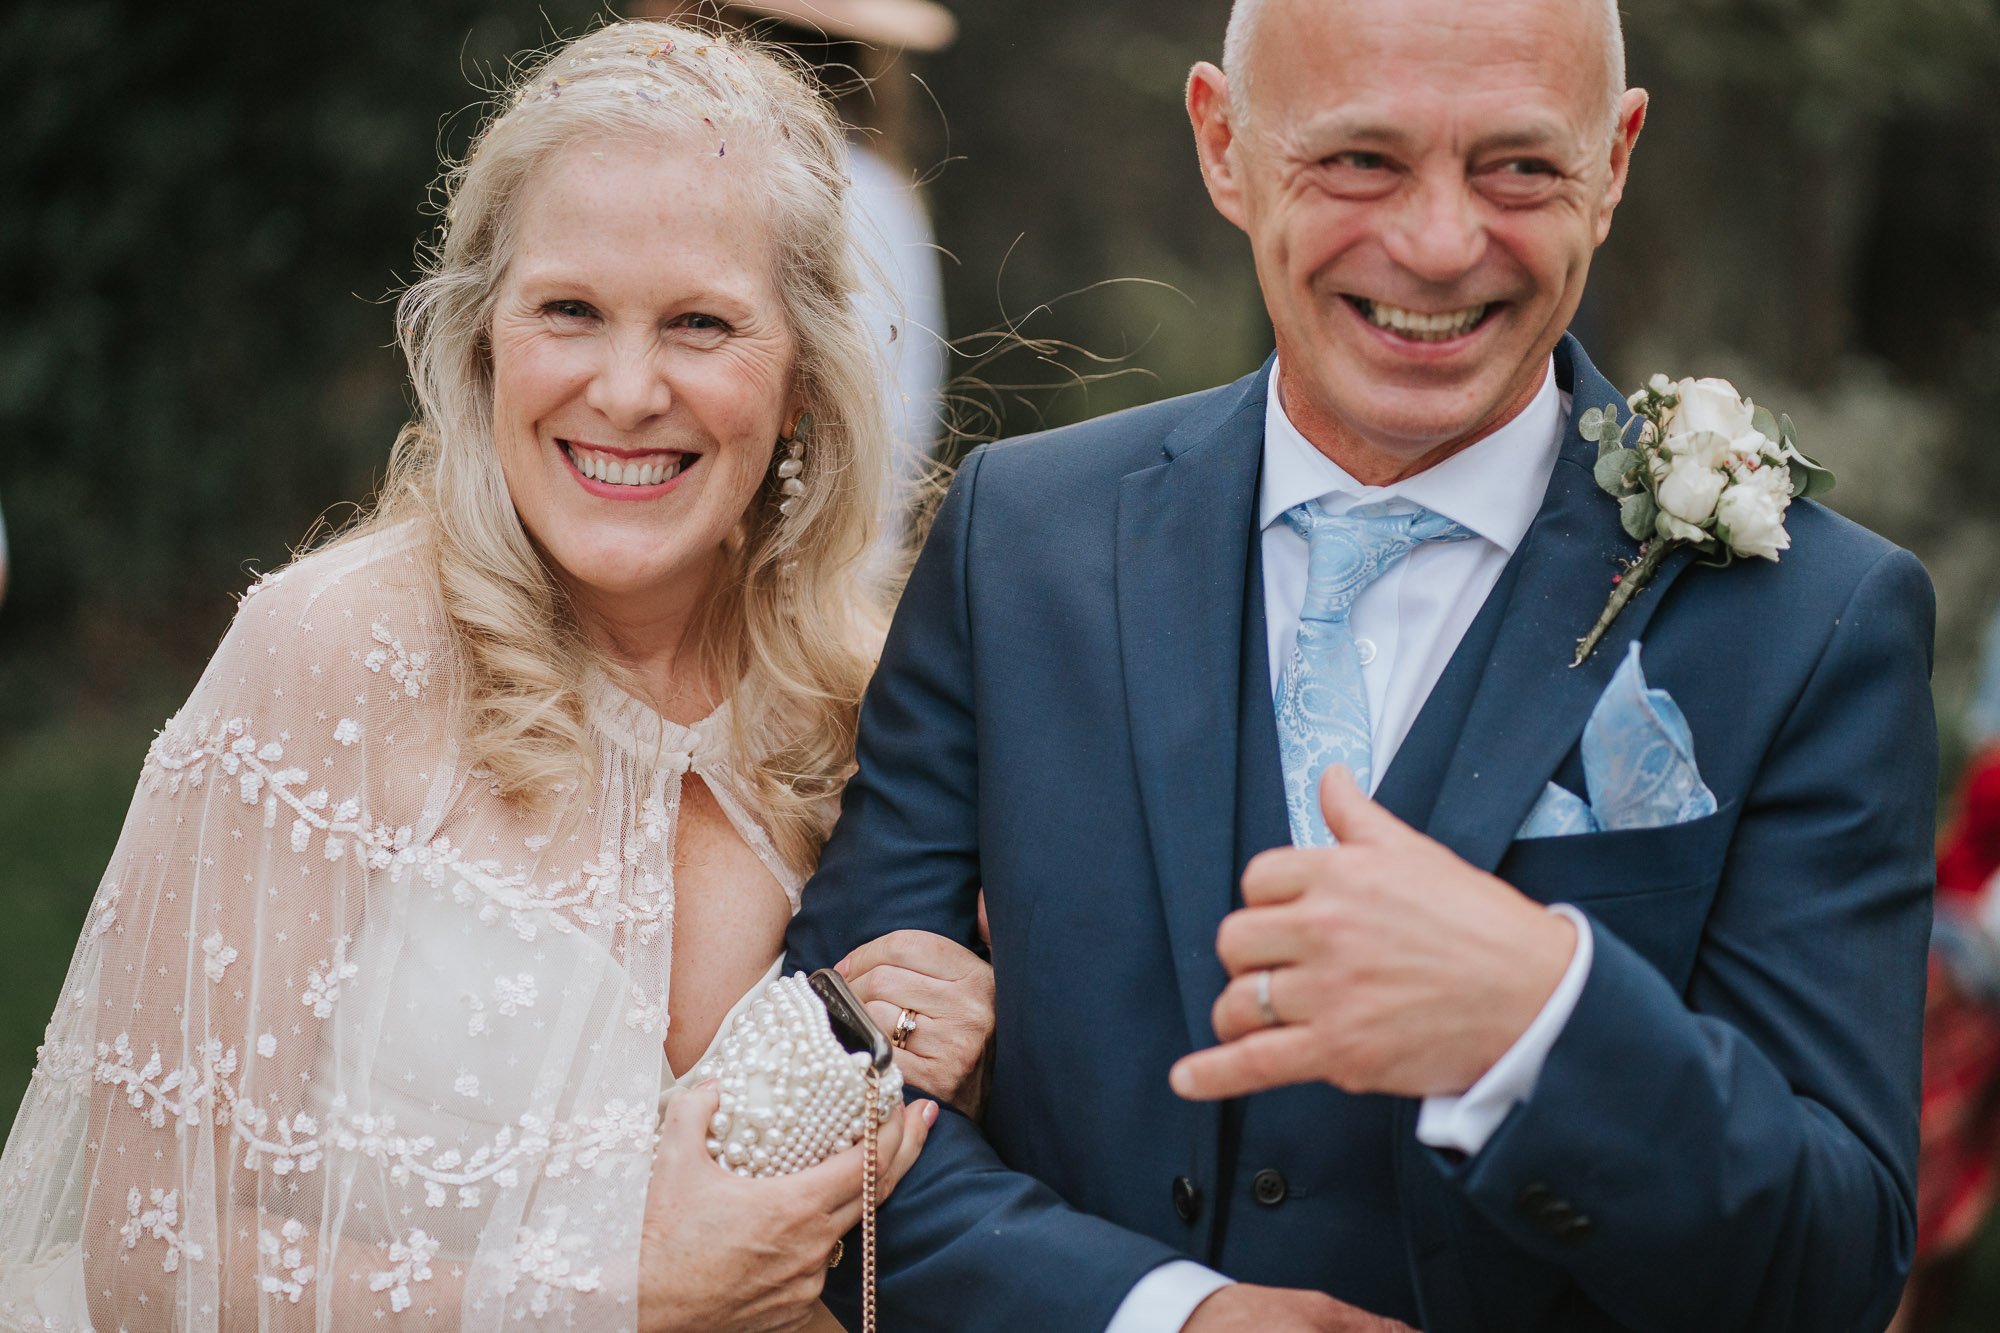  Bride and groom smiling after their wedding at Winchester House in Putney, South London. 